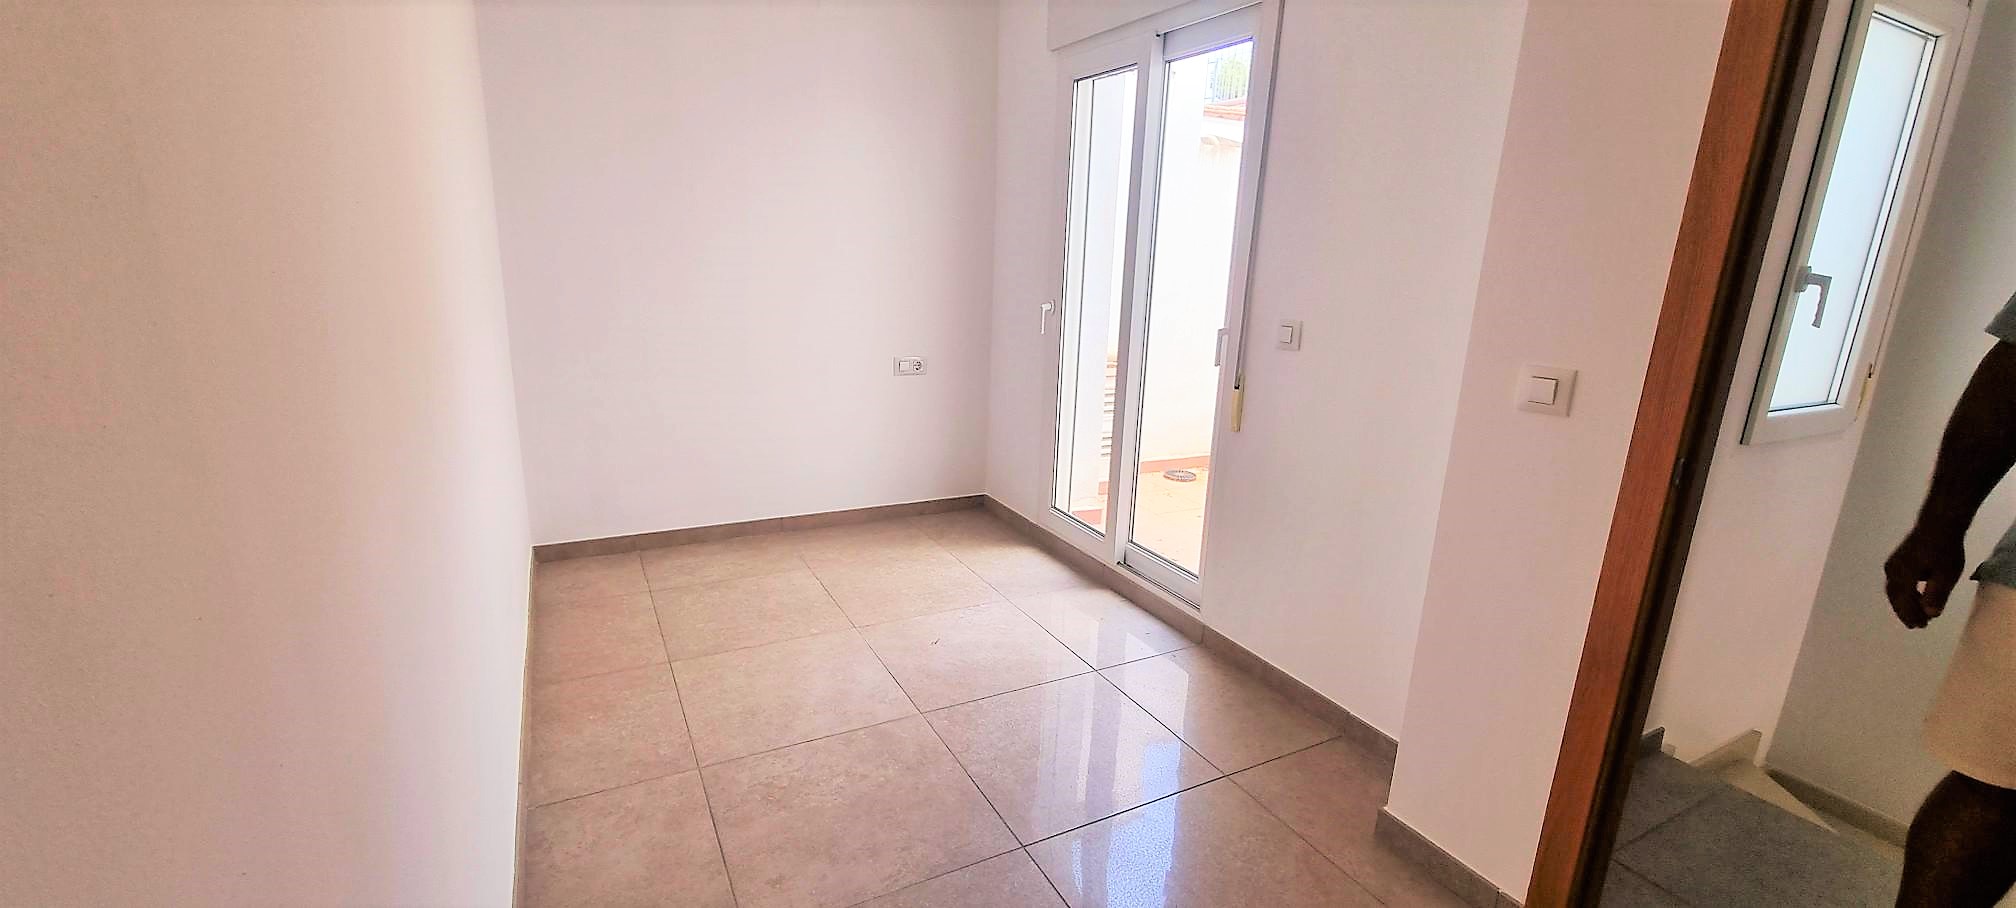 Townhouse for sale in Pedreguer